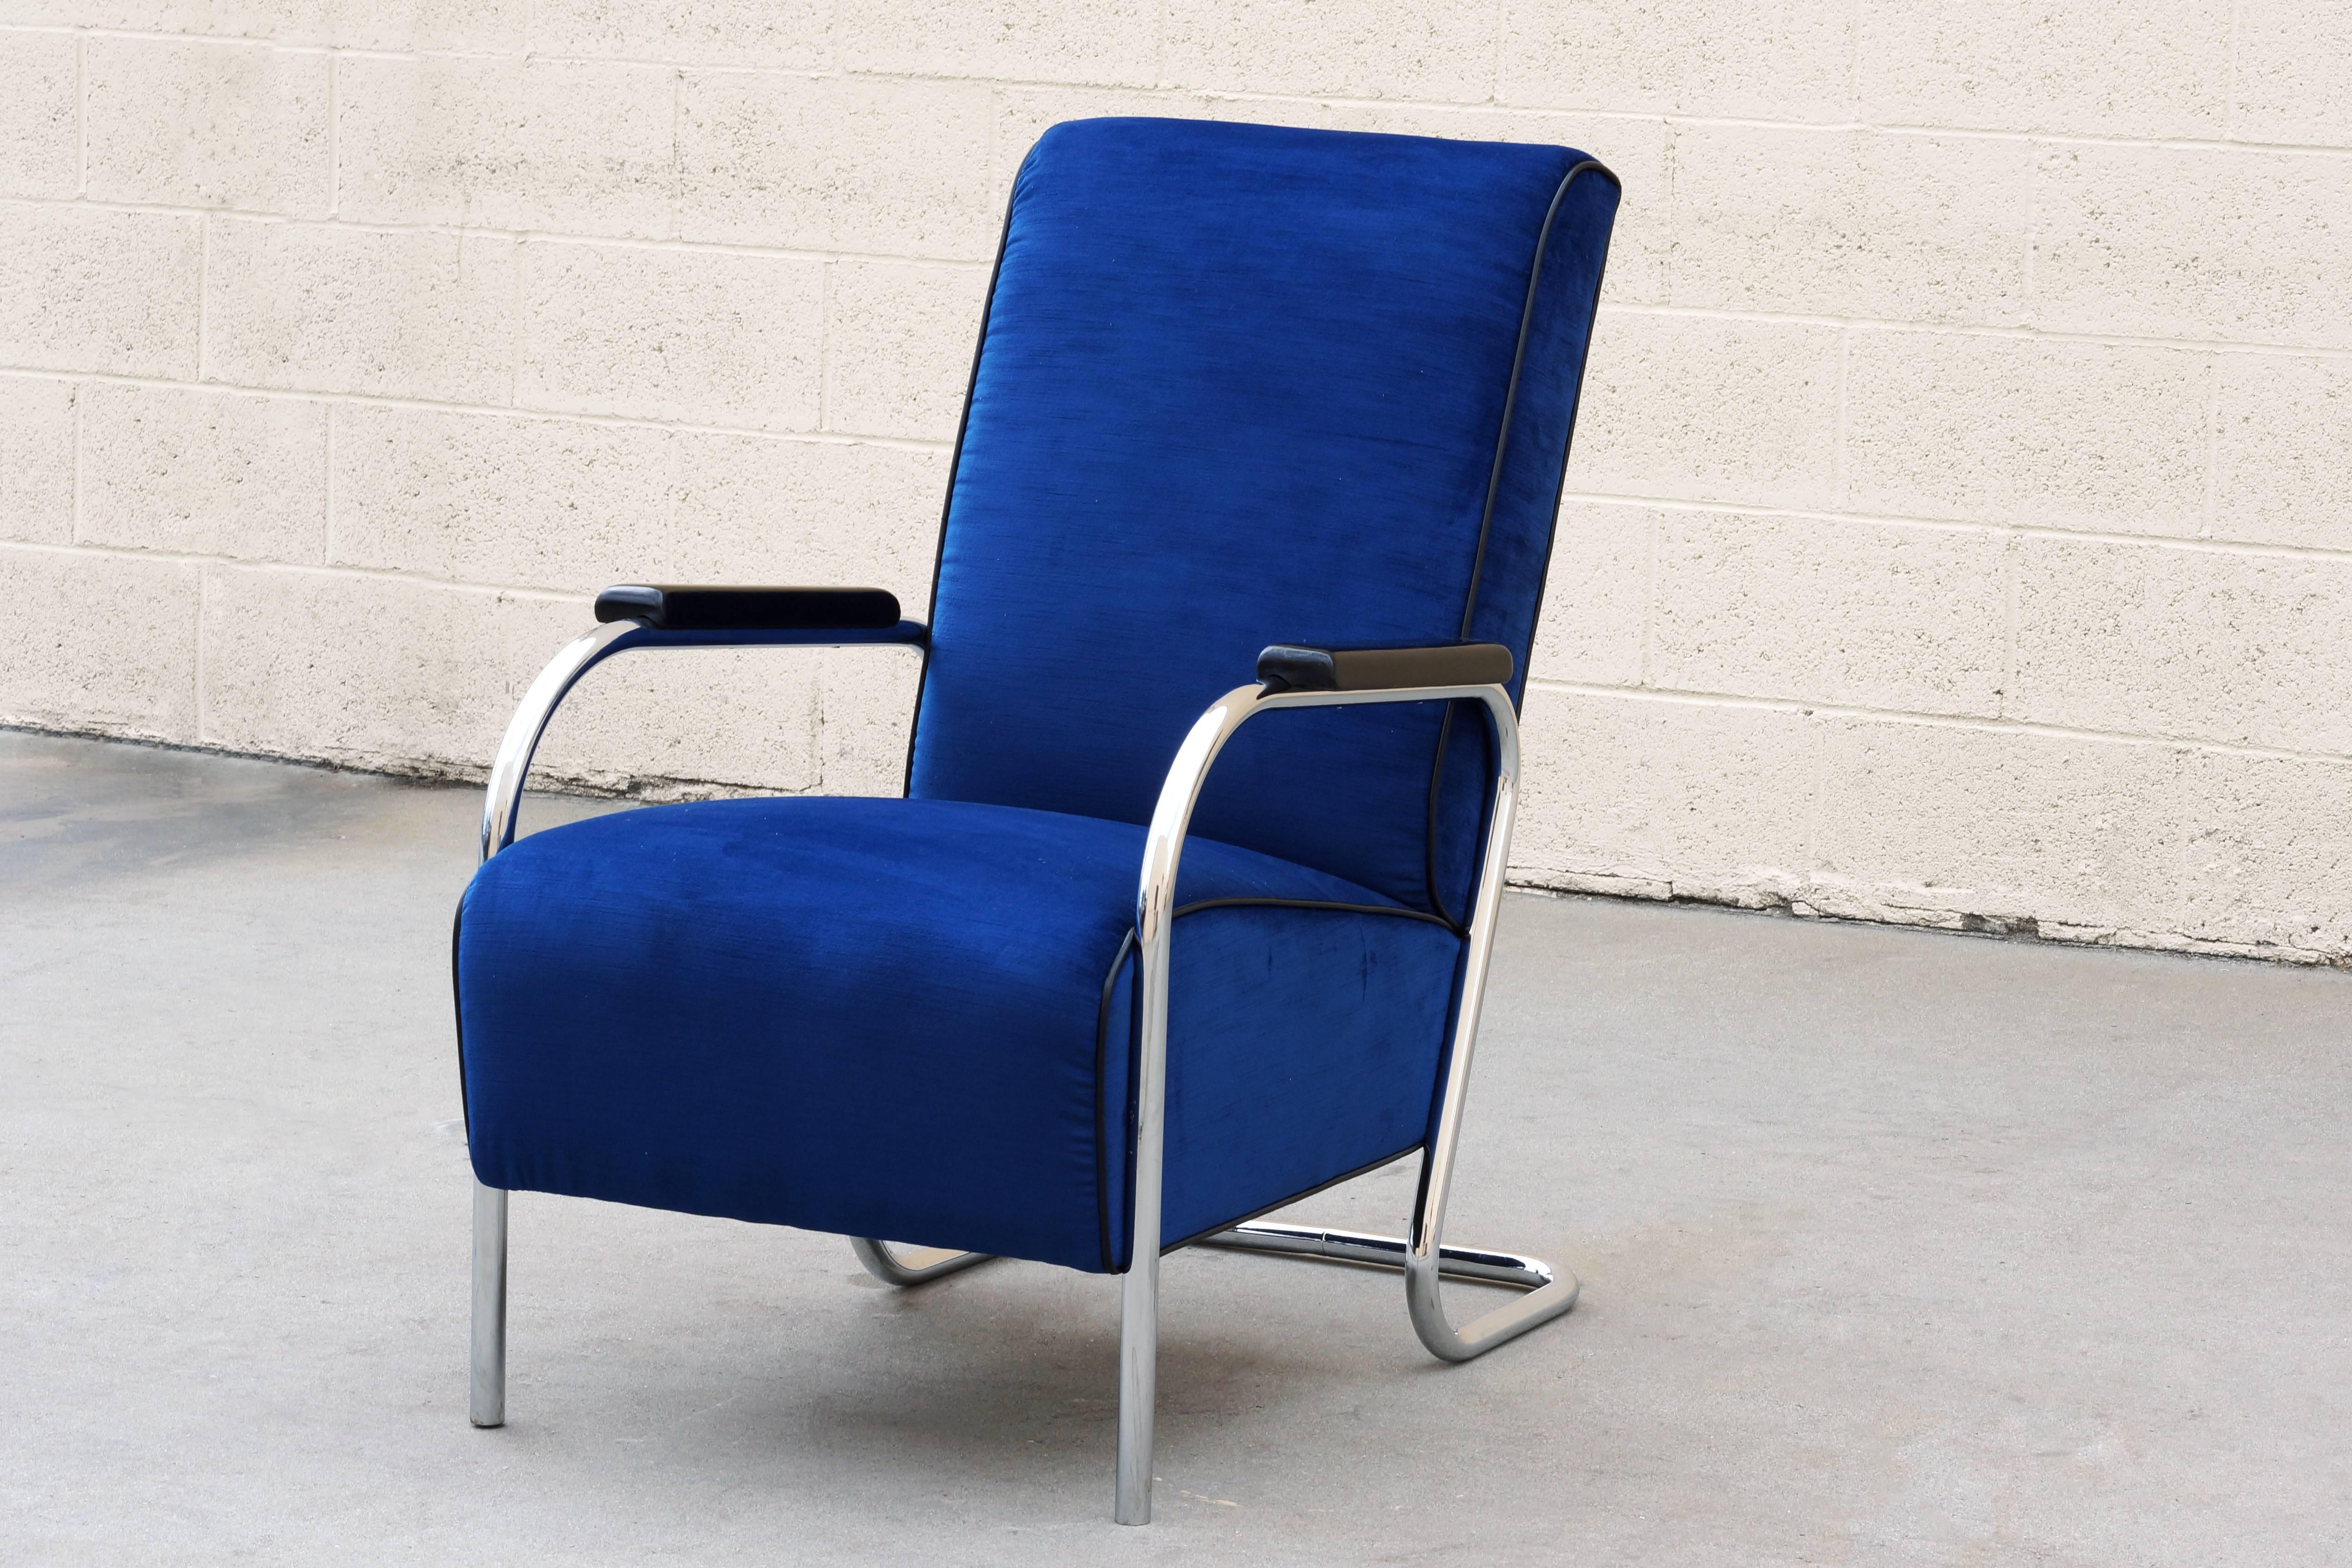 Excellent Art Deco era chrome armchair by Lloyd, circa 1930s. Newly chromed and reupholstered in blue velvet with black vinyl piping. This beauty is in excellent condition. 

Dimensions: 36